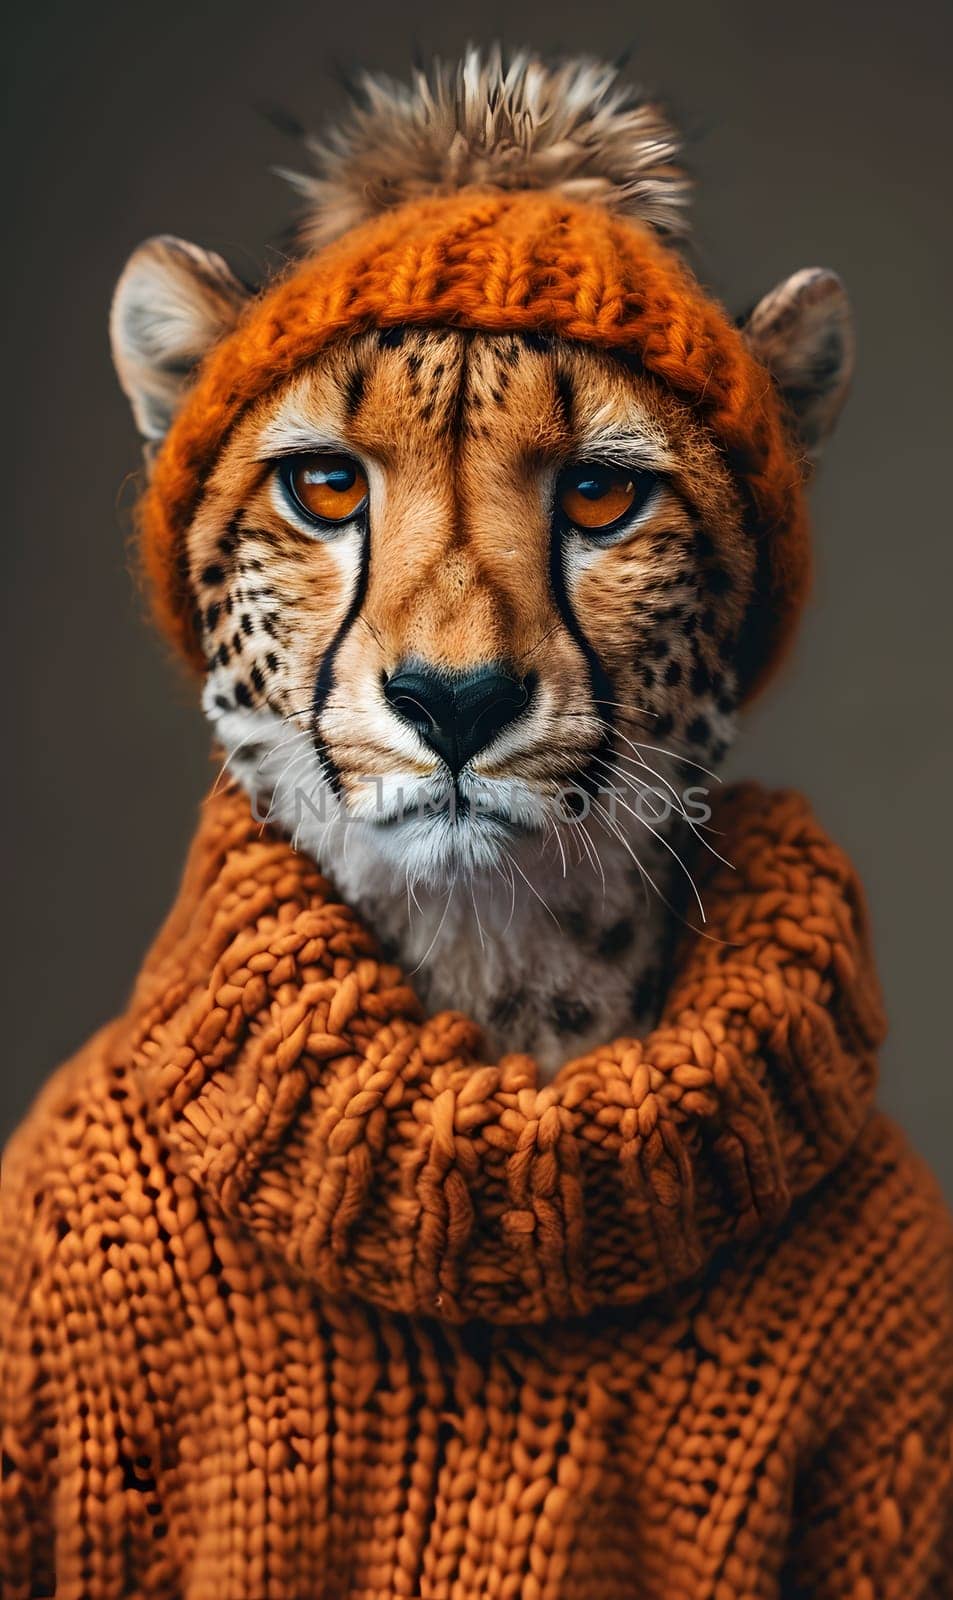 Carnivore felidae in orange sweater and hat, resembling a Bengal tiger by Nadtochiy